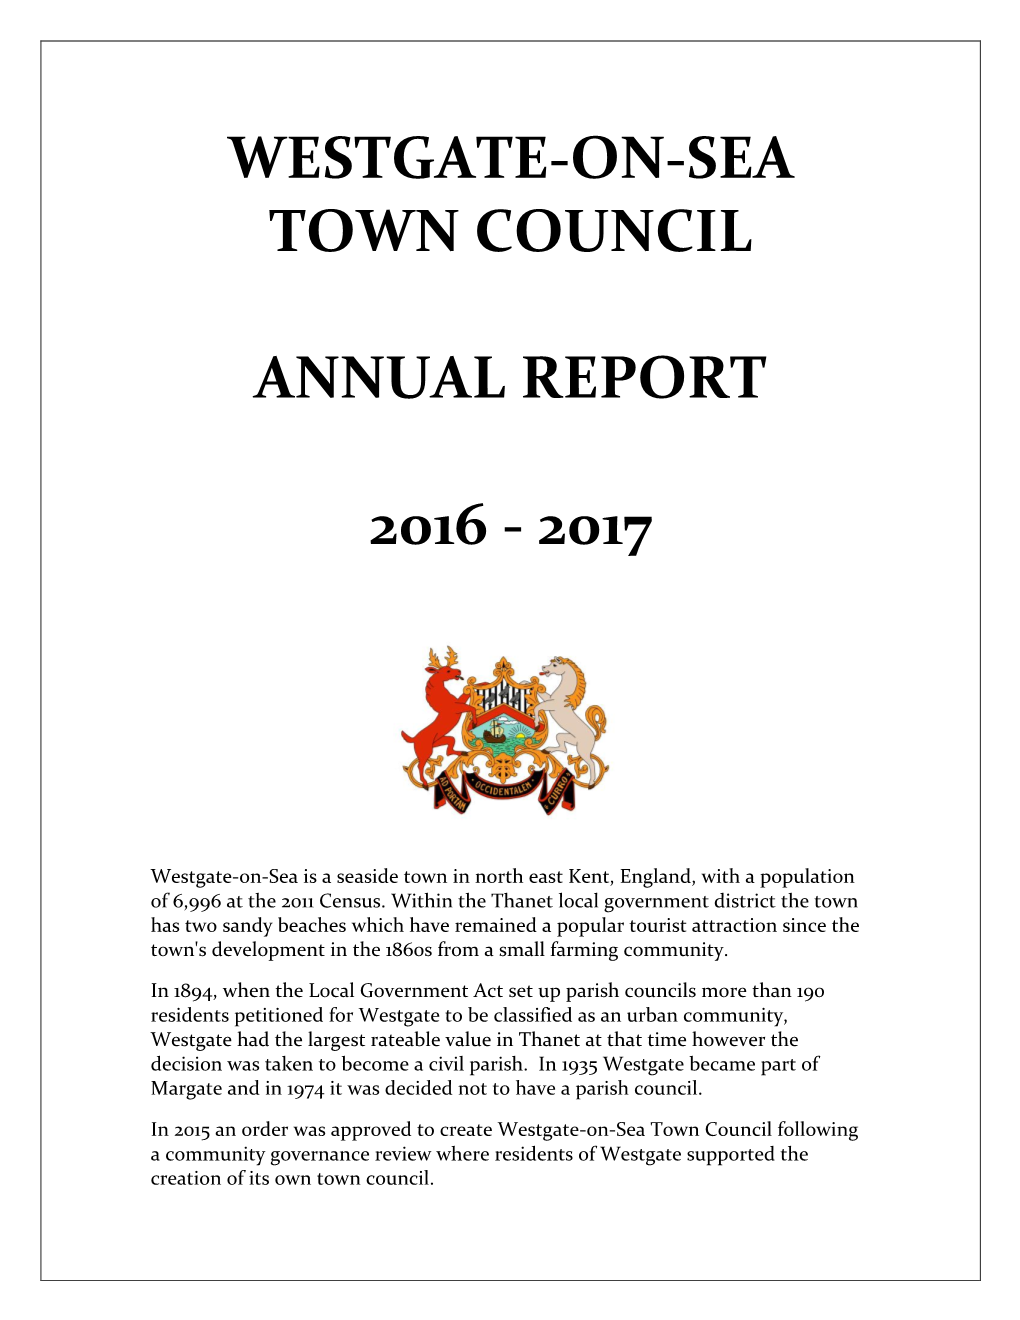 Westgate-On-Sea Town Council Annual Report 2016